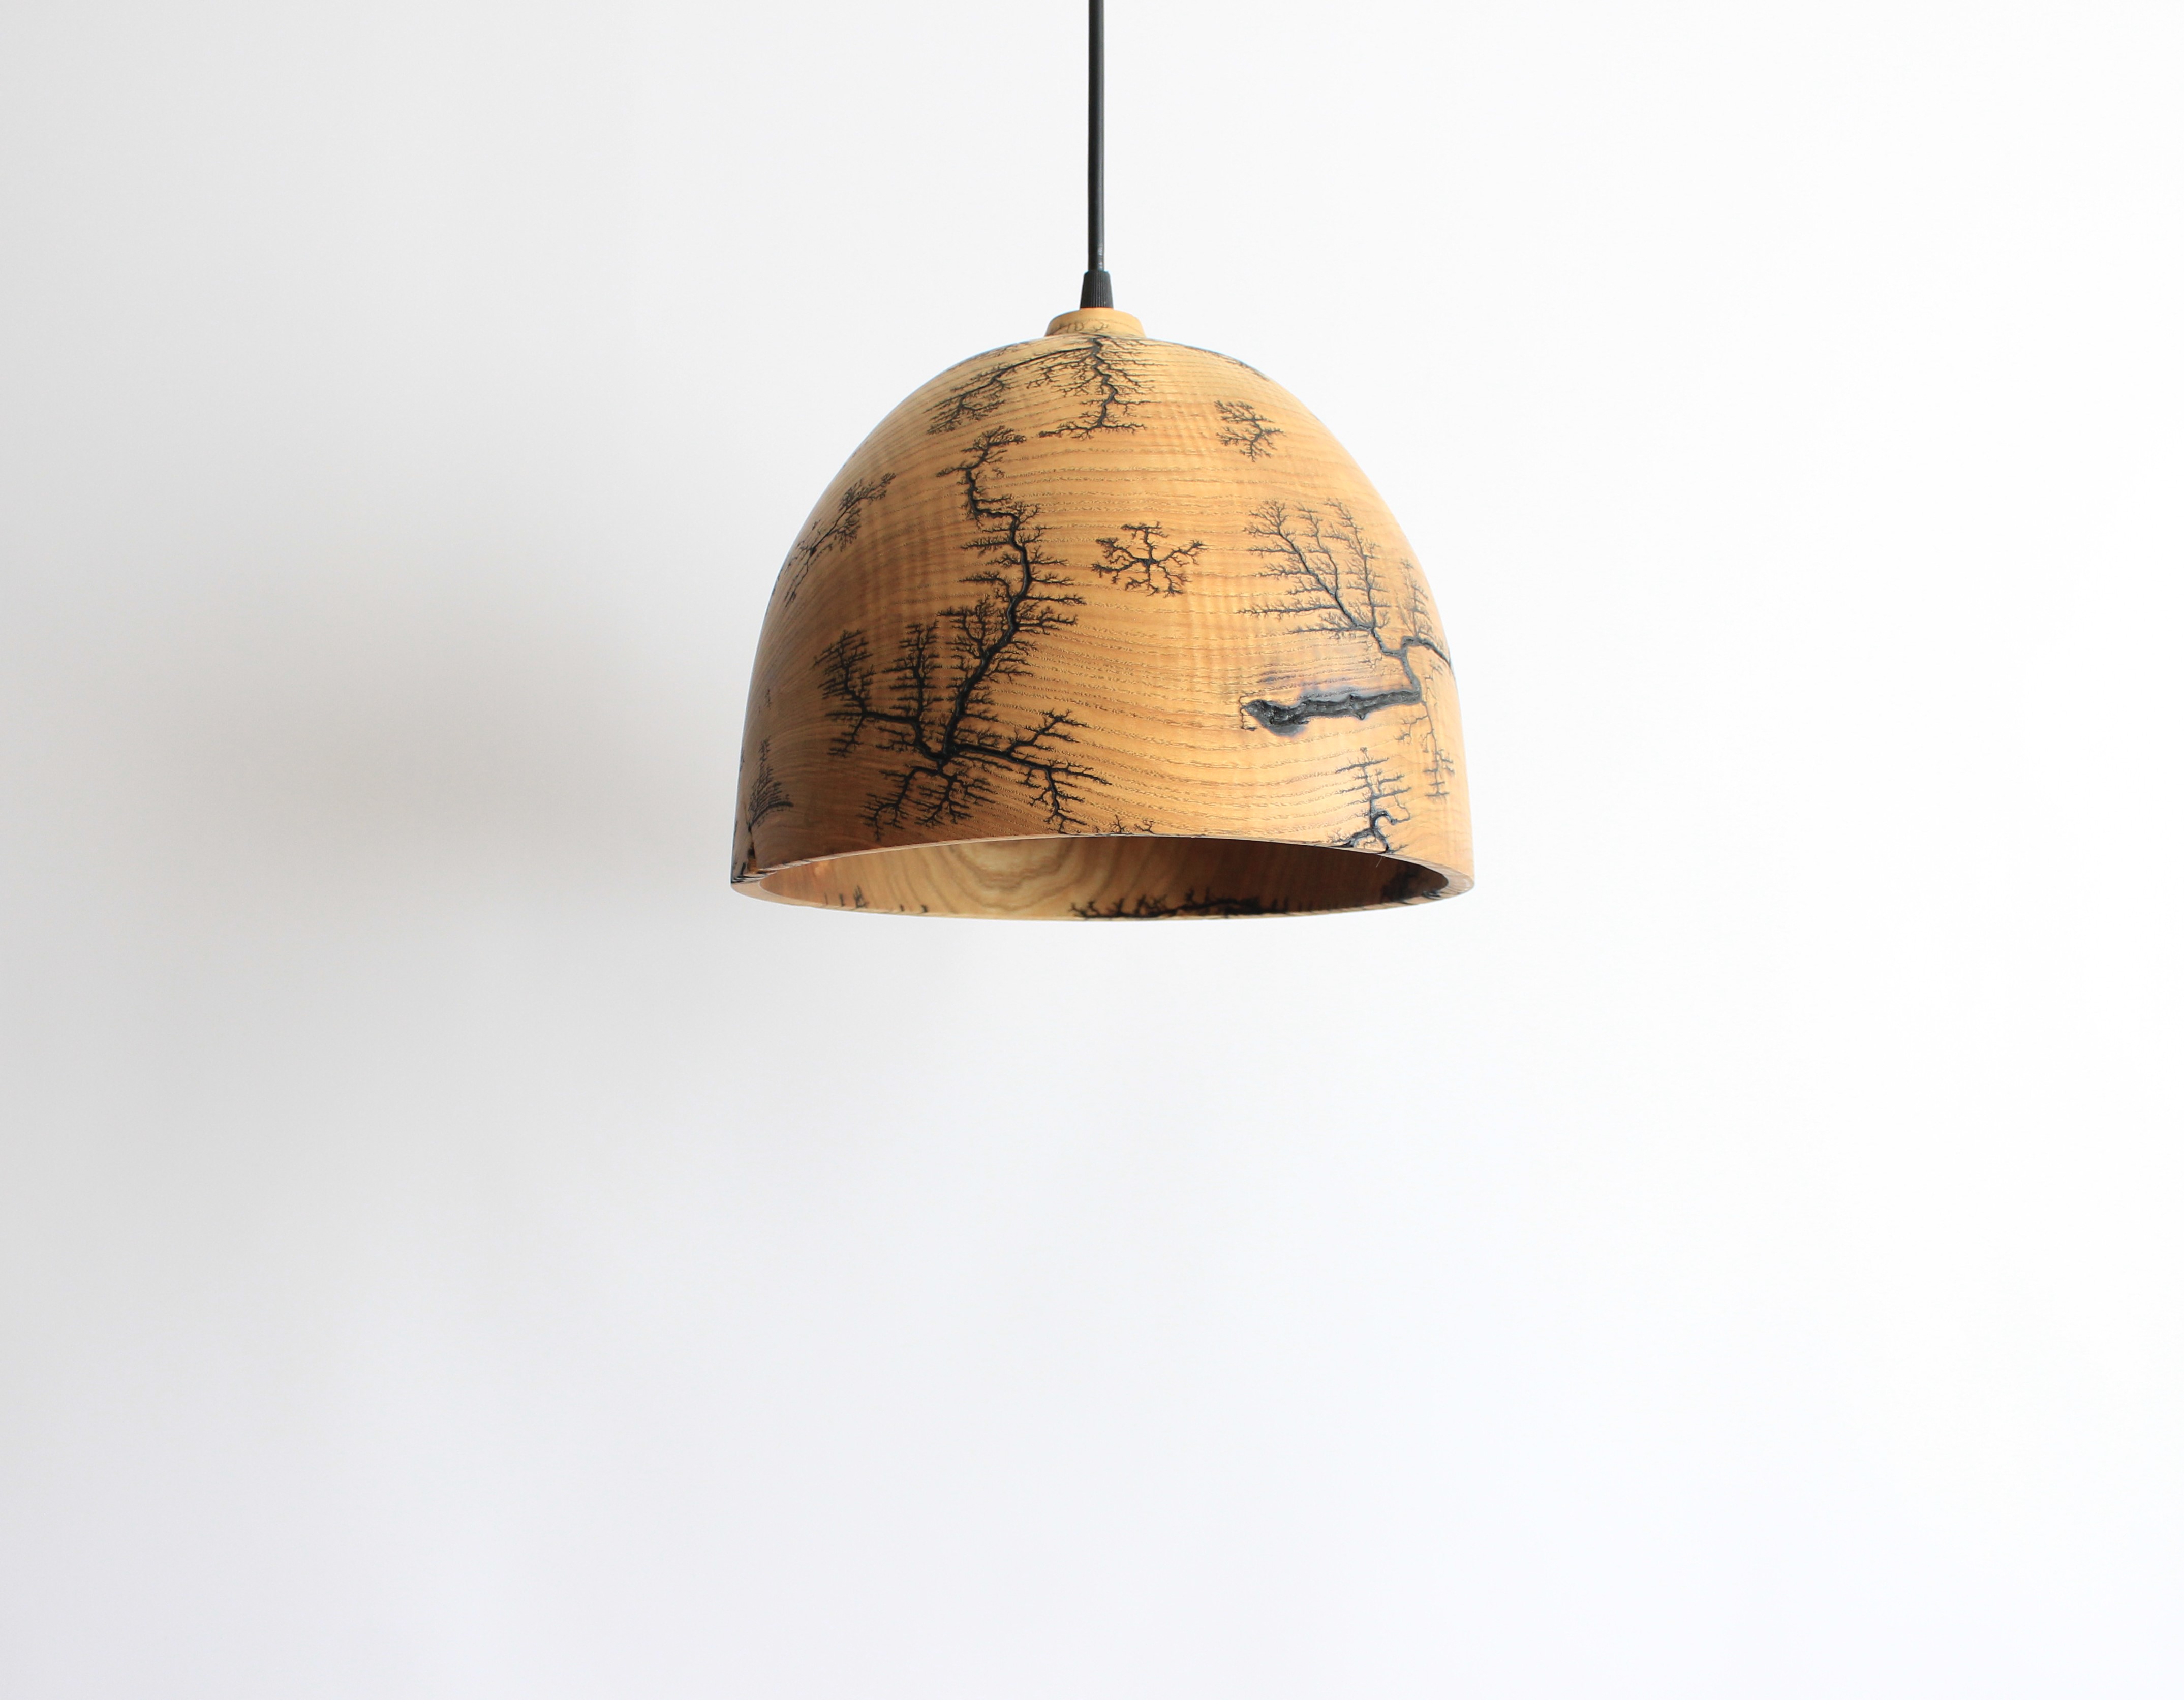 Wood pendant light, decorated with lightings